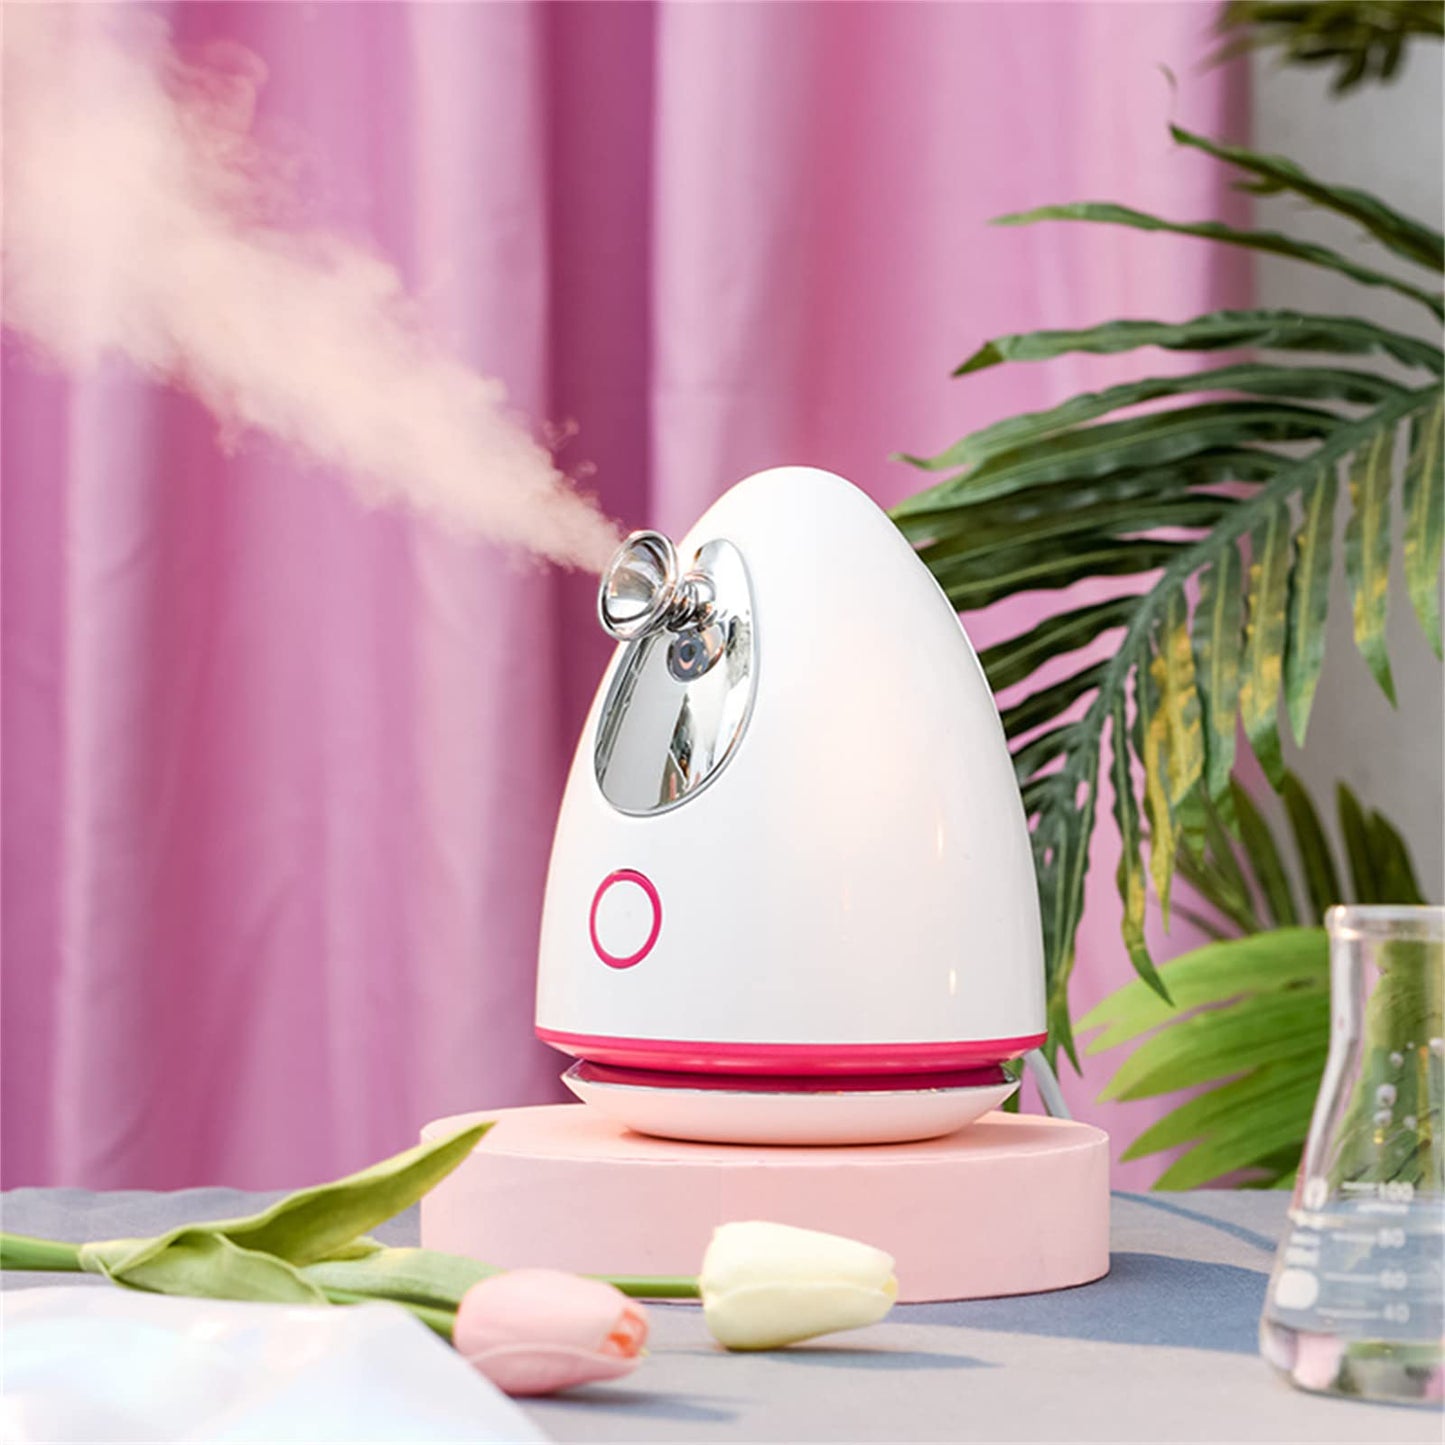 Arabest Facial Steamer, Nano Ionic Face Steamer for Facial Deep Cleaning, Warm Mist Home Spa Portable Humidifier for Men and Women Face Spa Moisturizing Unclogs Pores (Small Mist)